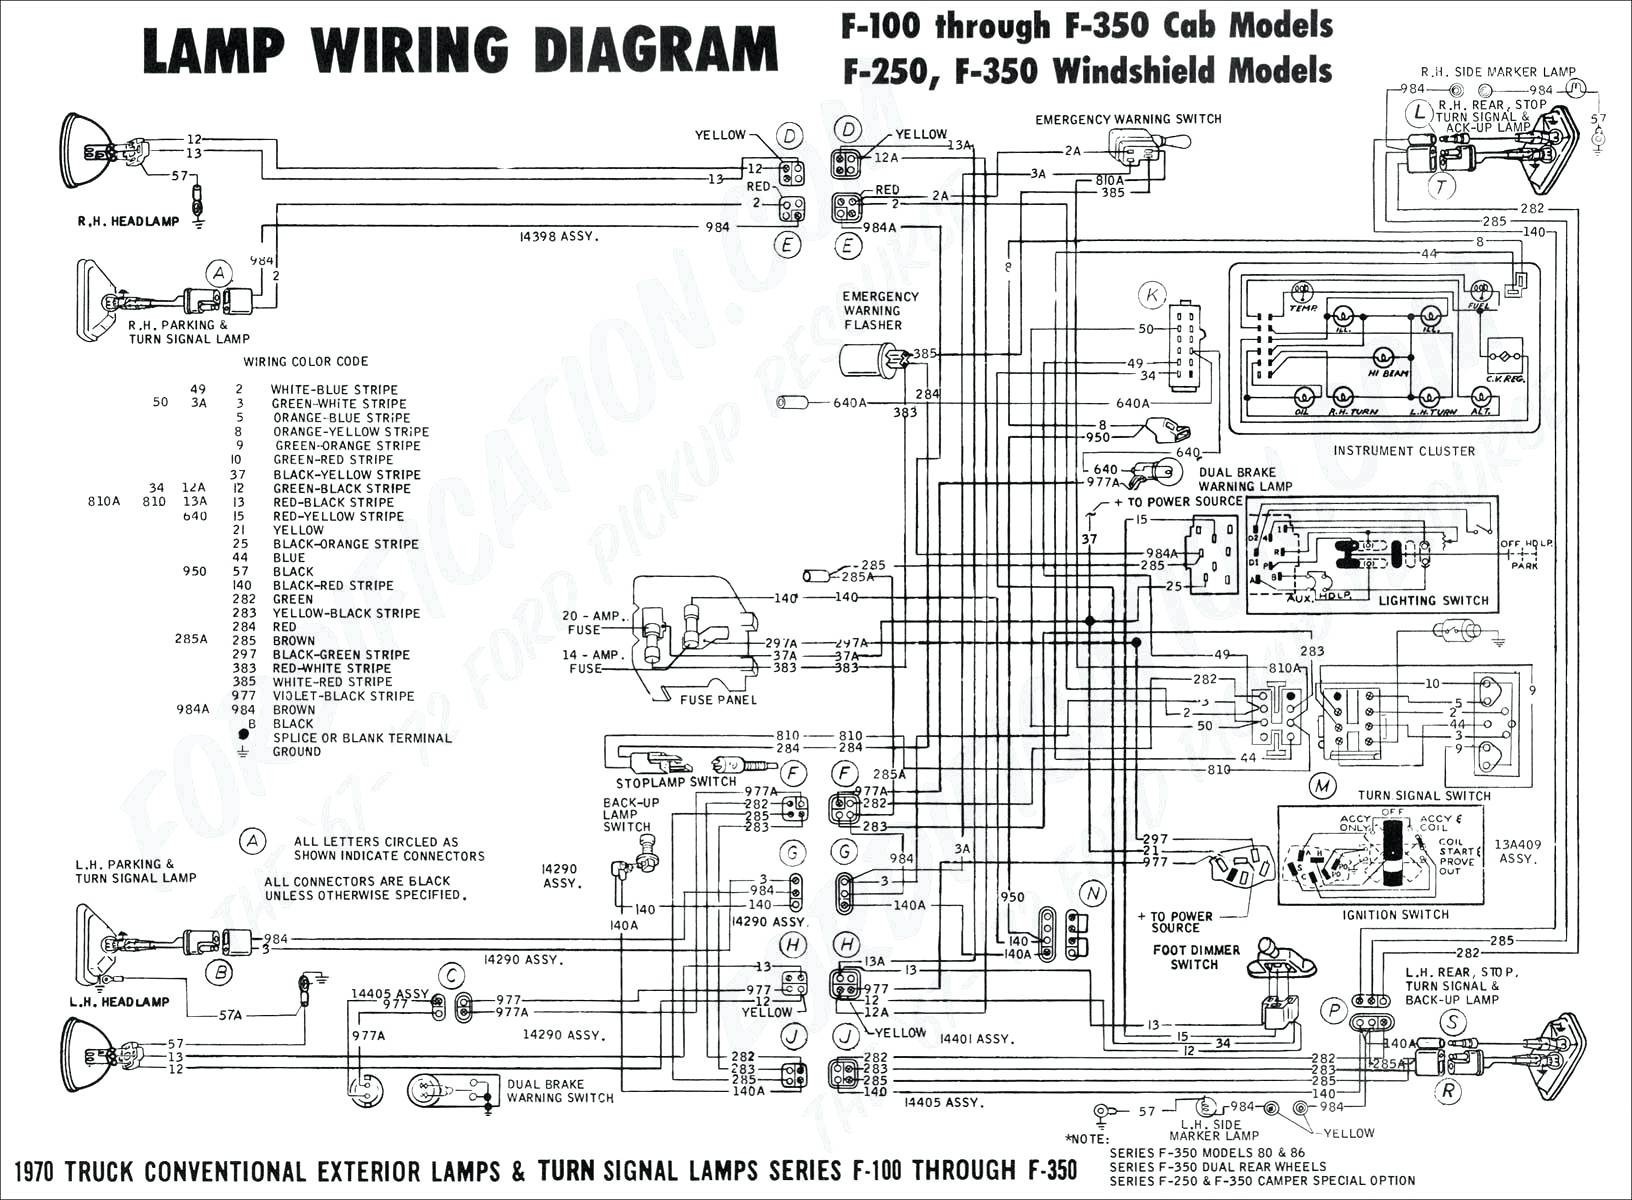 2003 Ford Explorer Window Wiring Diagram Valid 2002 Ford Excursion Wiring Diagram Gallery